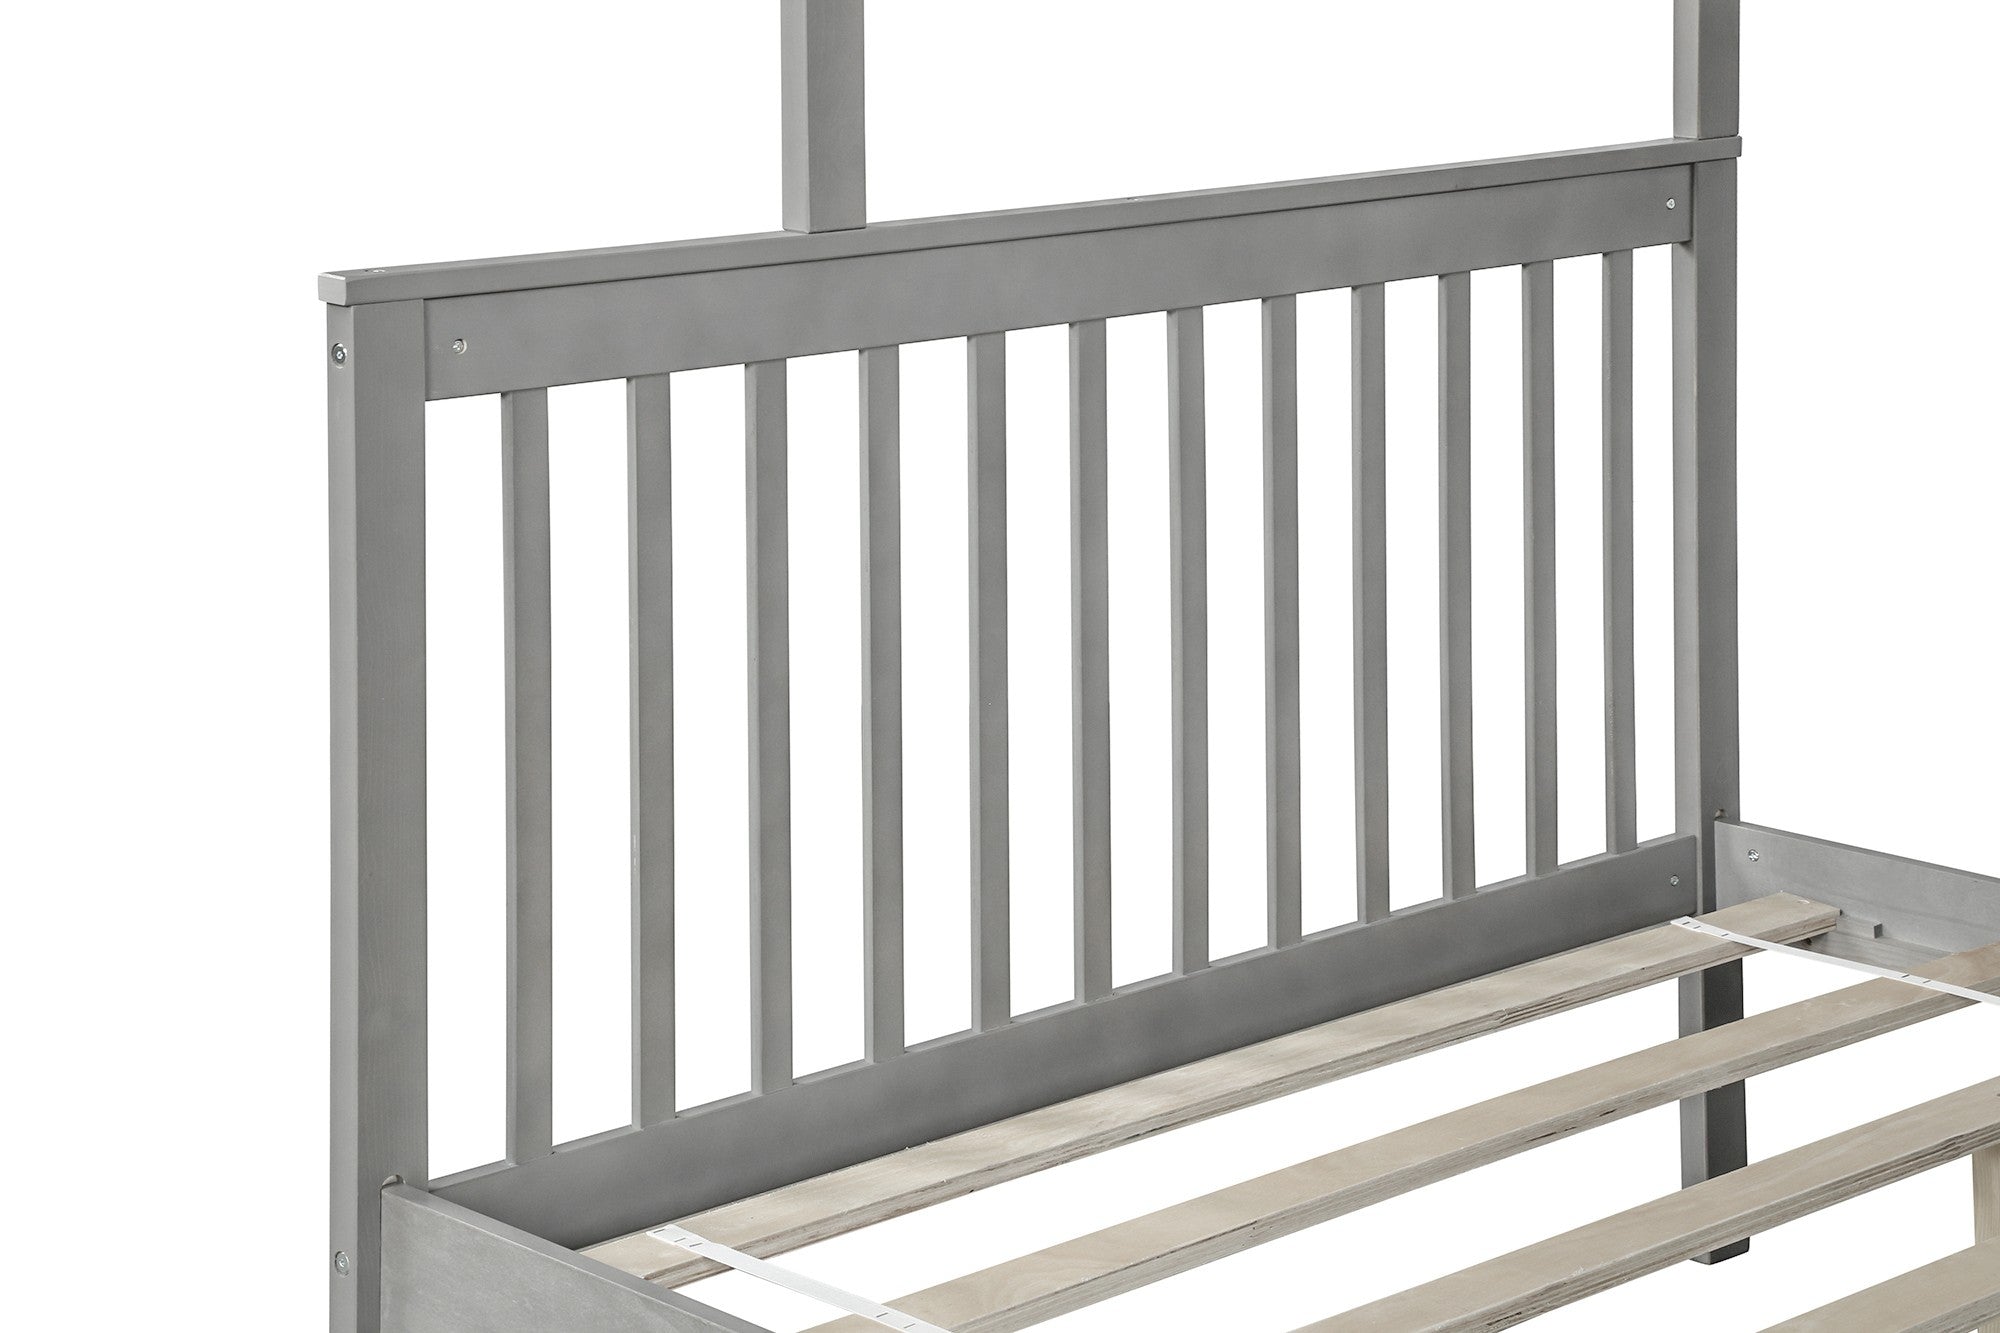 Gray Twin Over Full Farmhouse Style Bunk Bed with Staircase